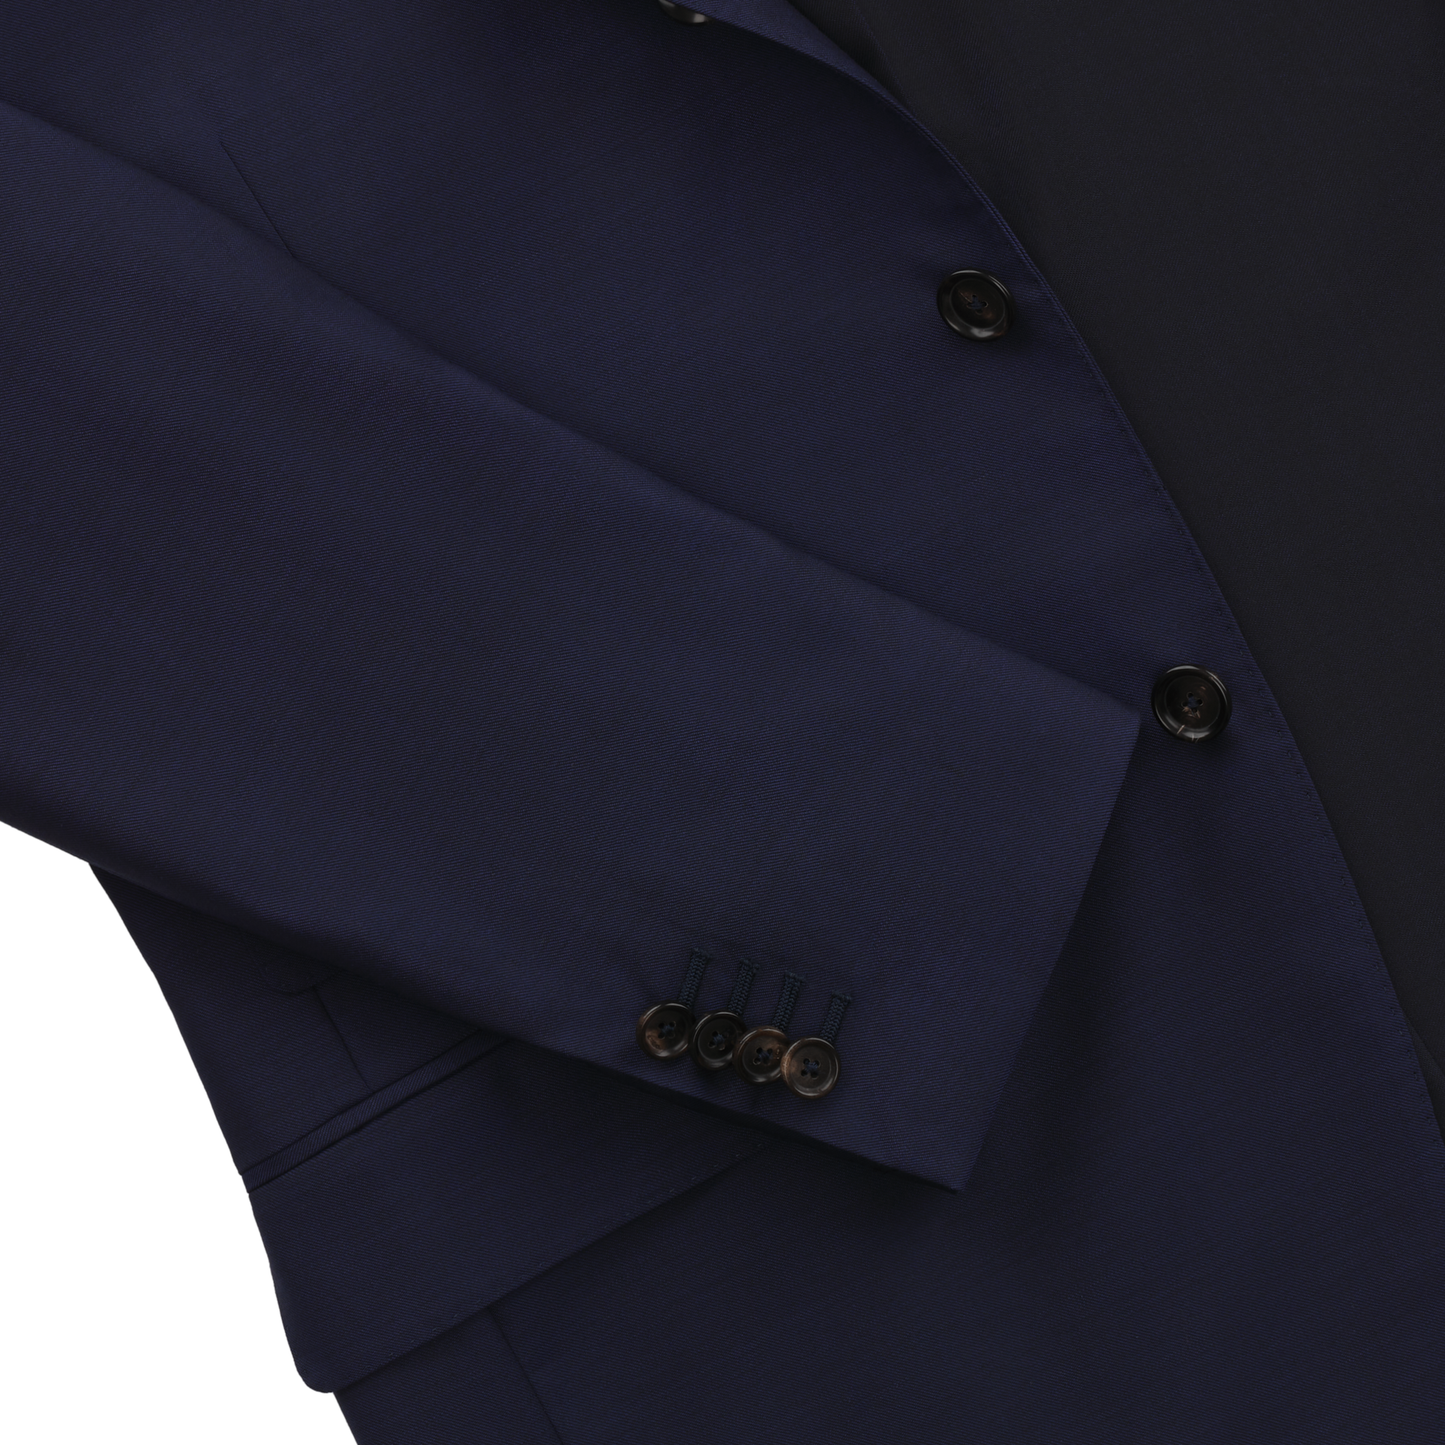 De Petrillo Single-Breasted Classic Virgin Wool Suit in Navy Blue. Exclusively Made for Sartale - SARTALE